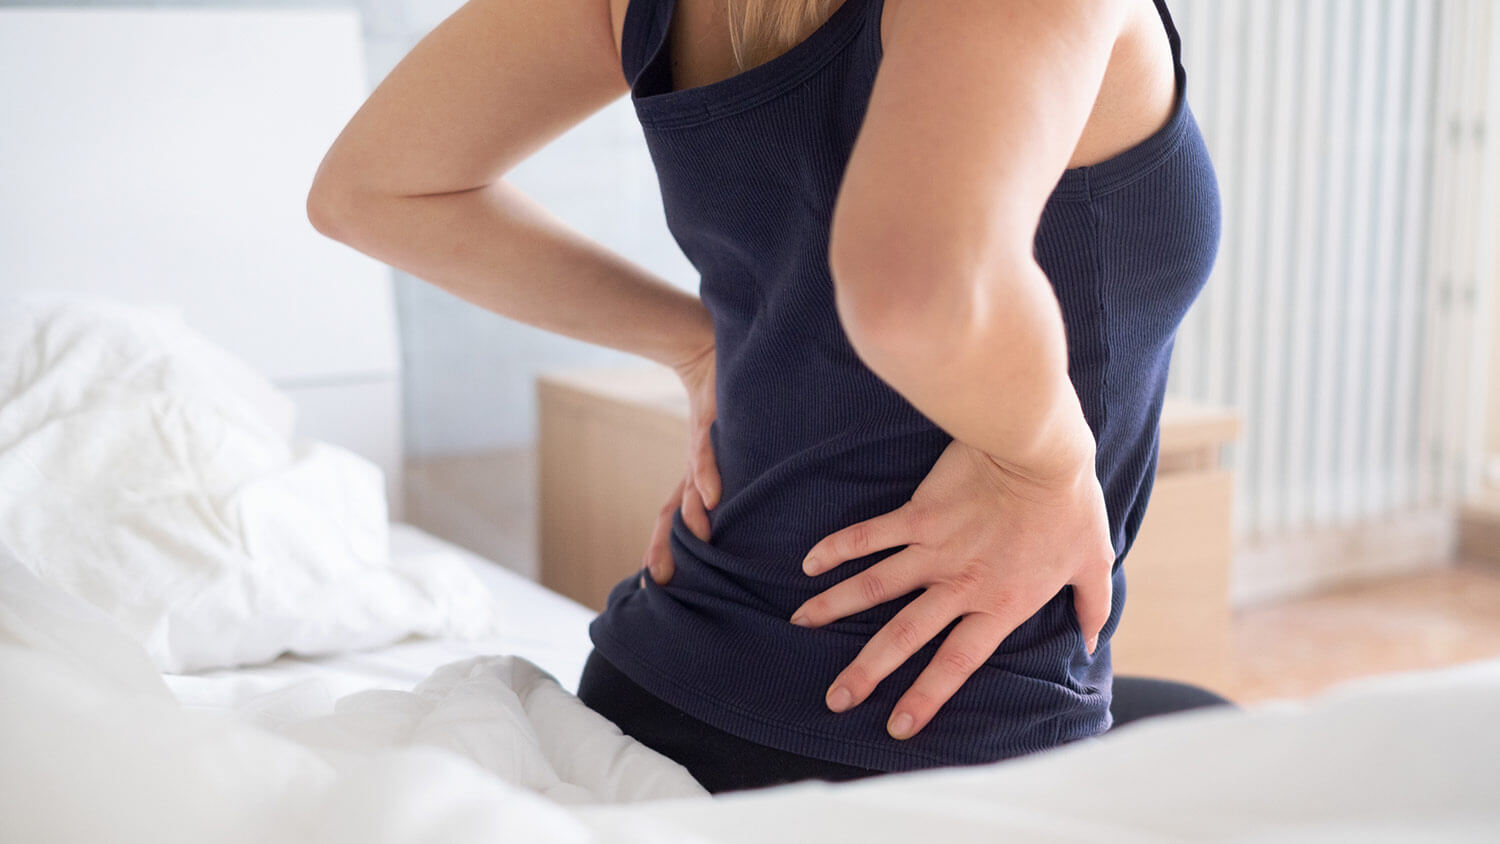 How To Relieve Hip Pain While Sleeping